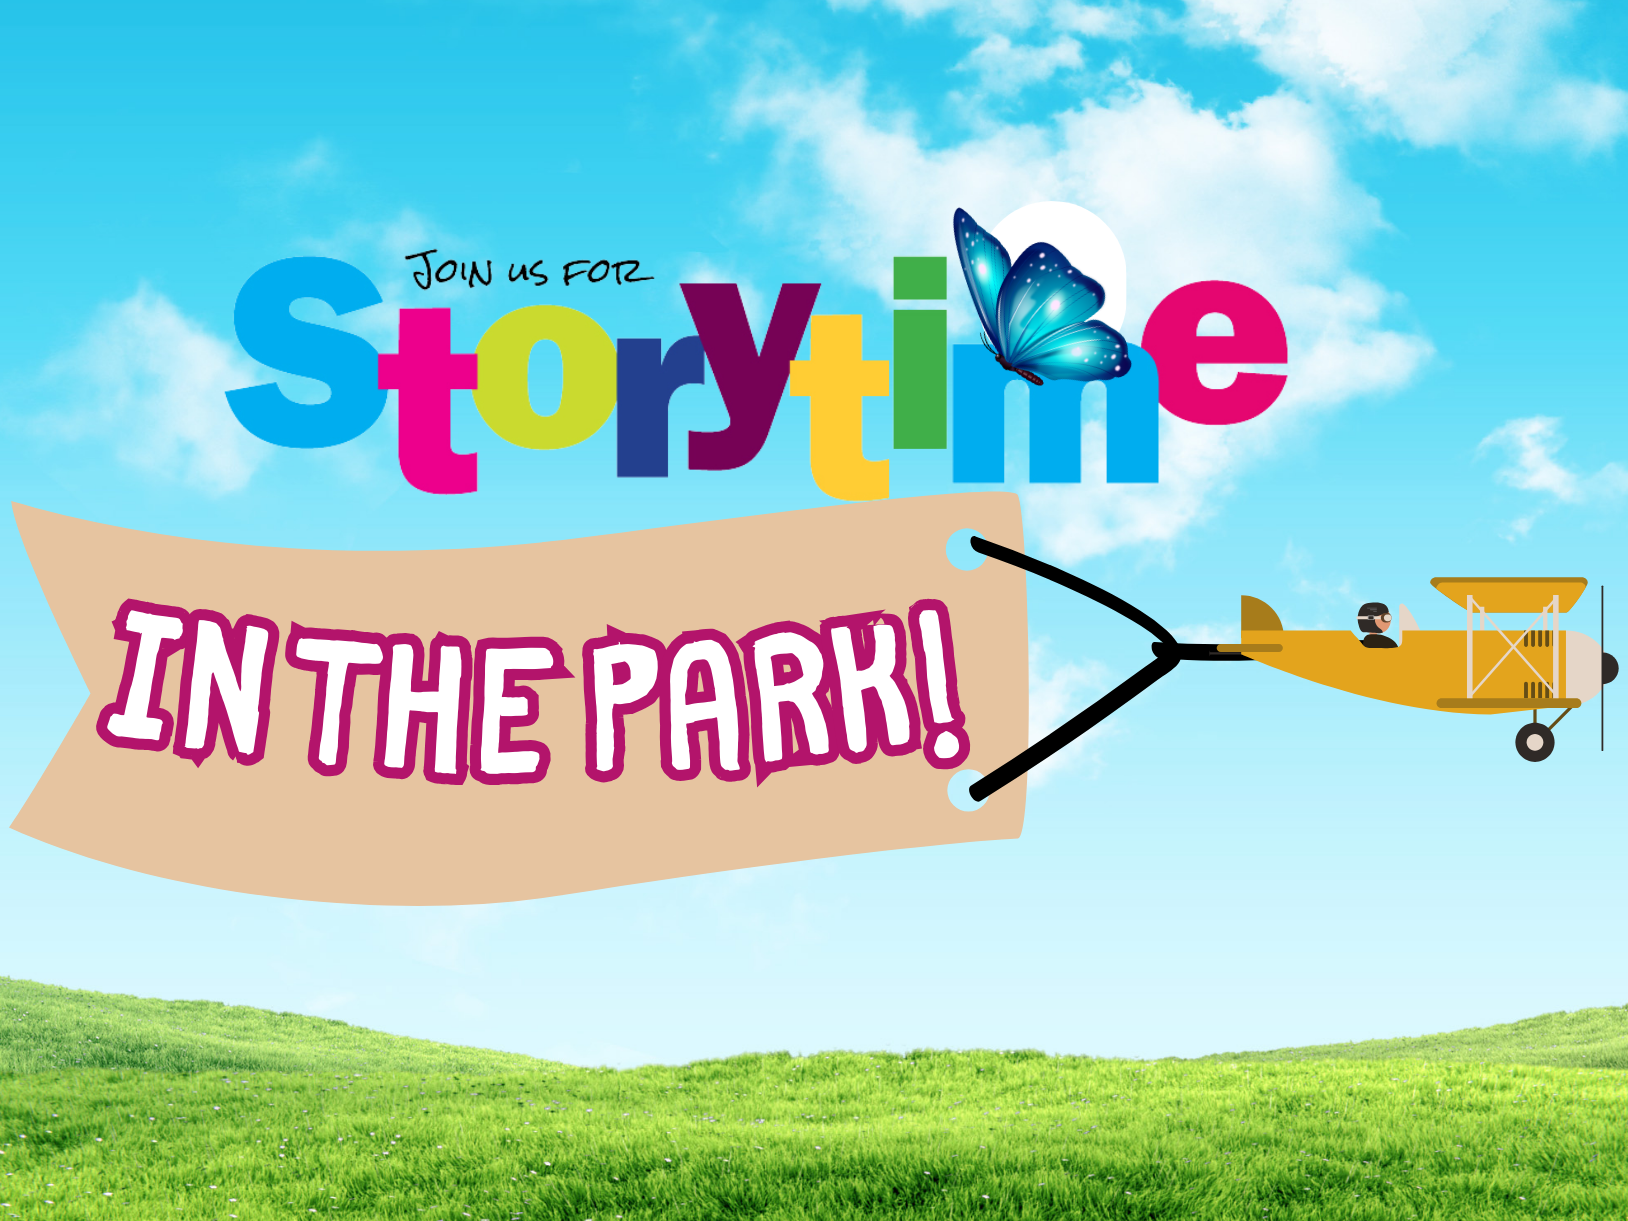 Plane flying banner saying "Storytime in the Park!"